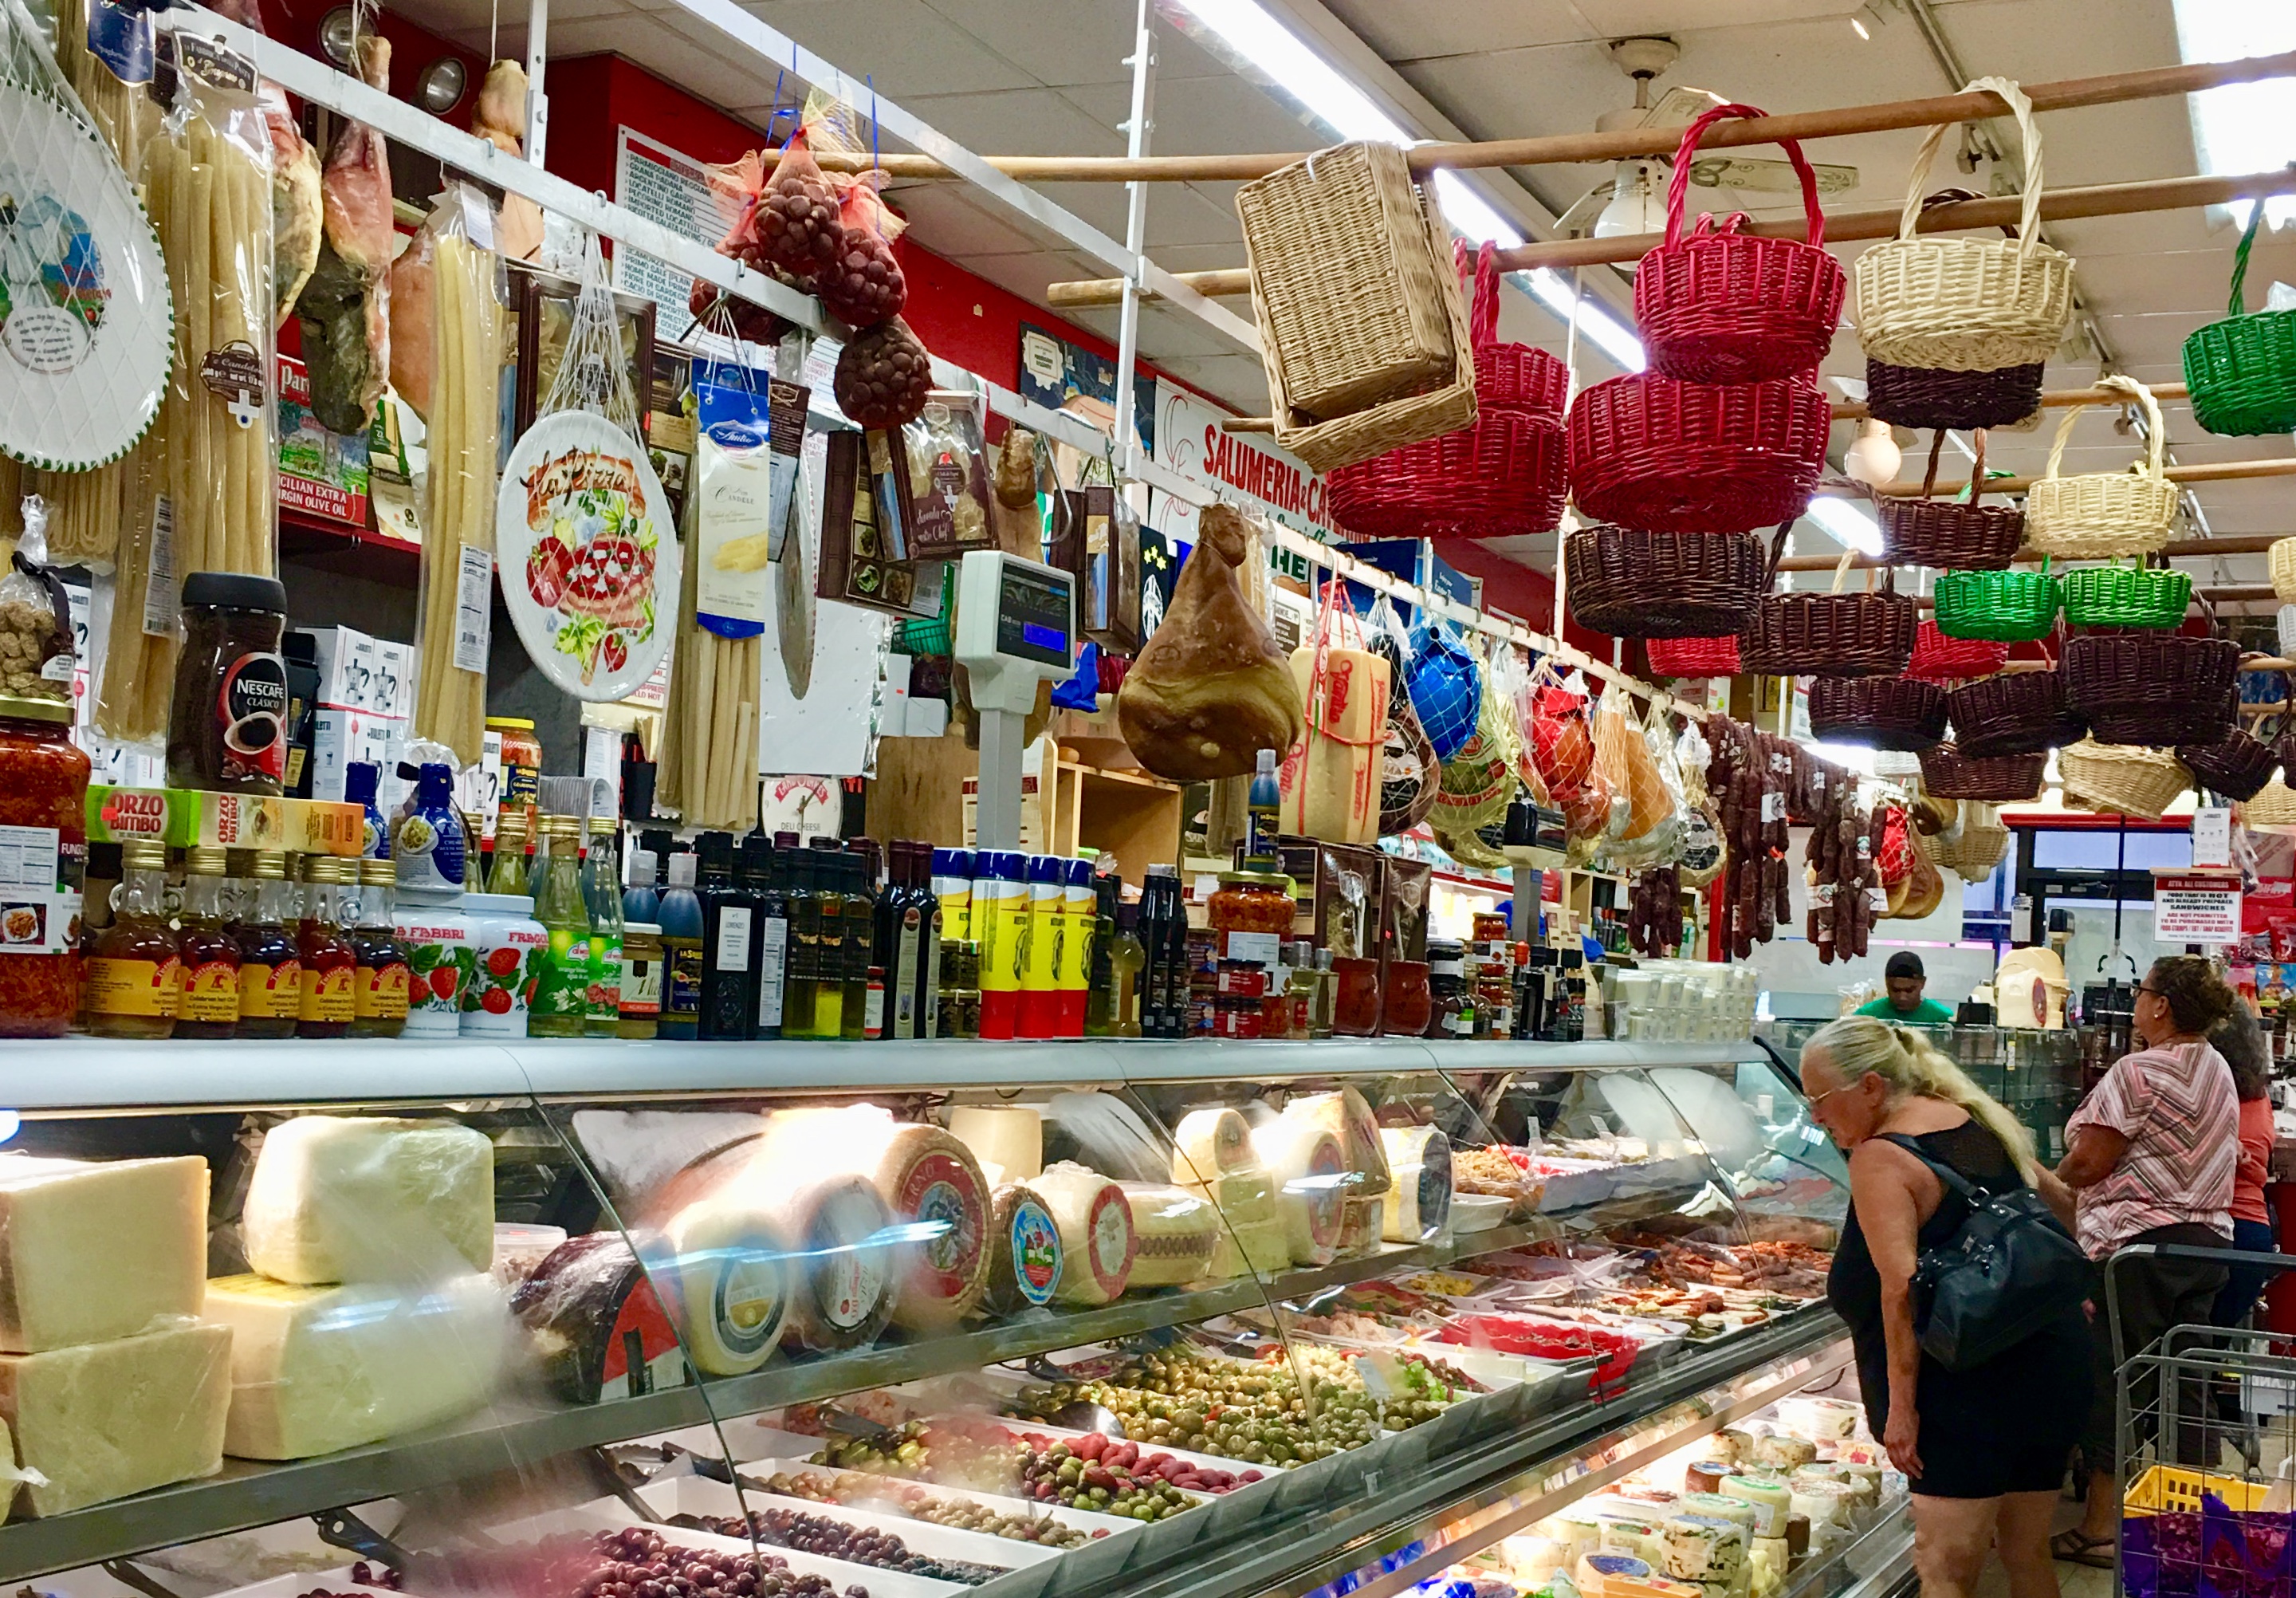 Here’s a glimpse of the olive and cheese selections at Frank & Sal Prime Meats. Eagle photo by Lore Croghan